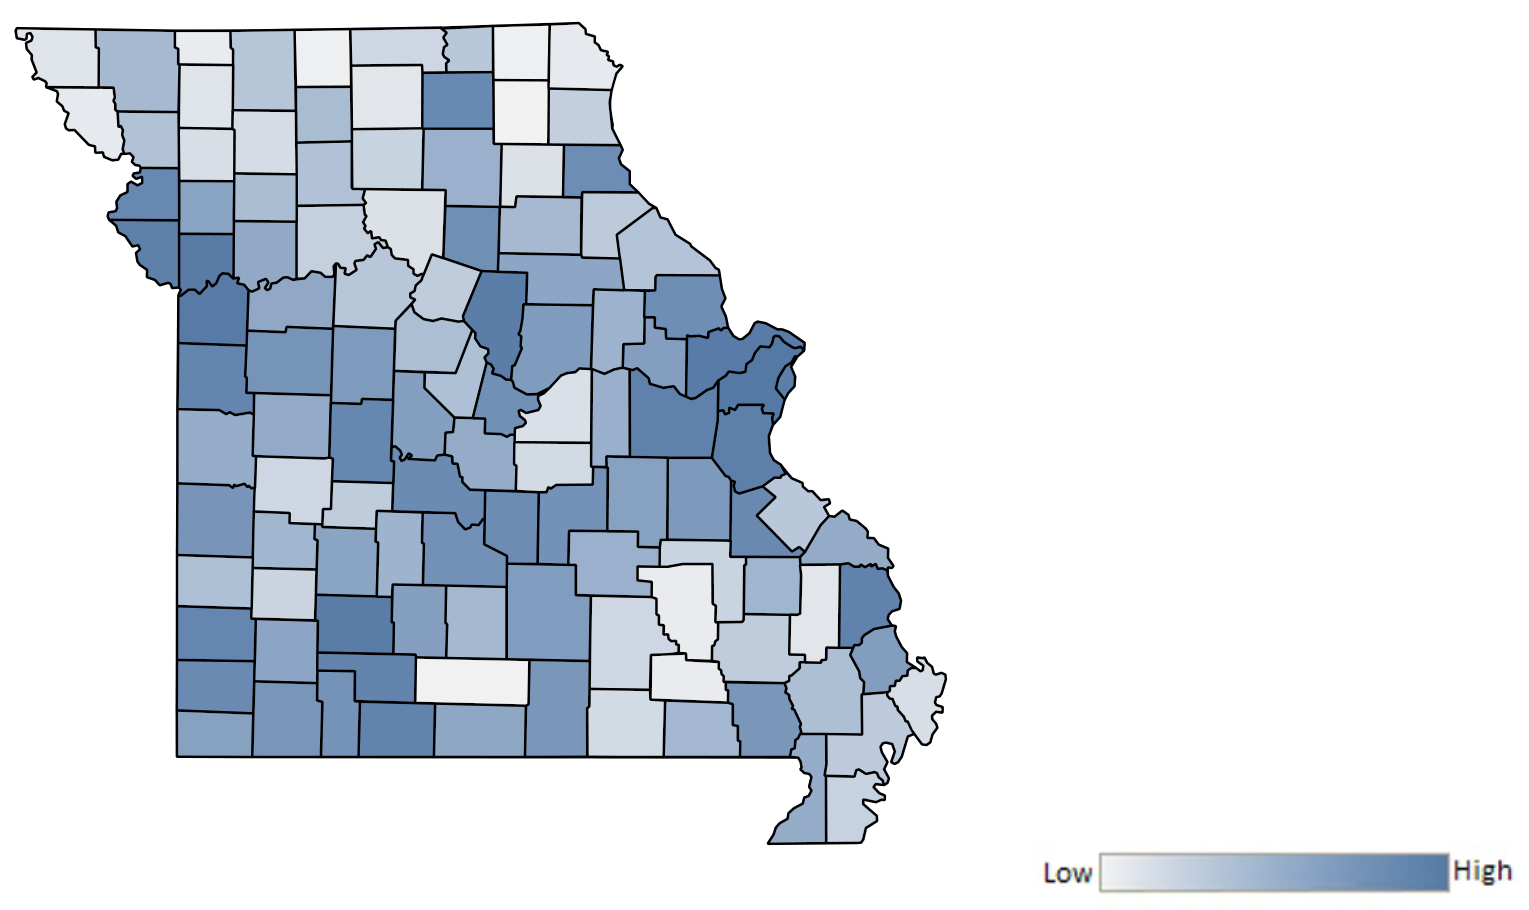 Map of Missouri counties indicating relative number of complaints from low to high. See attached CSV file for complaint data by jurisdiction.